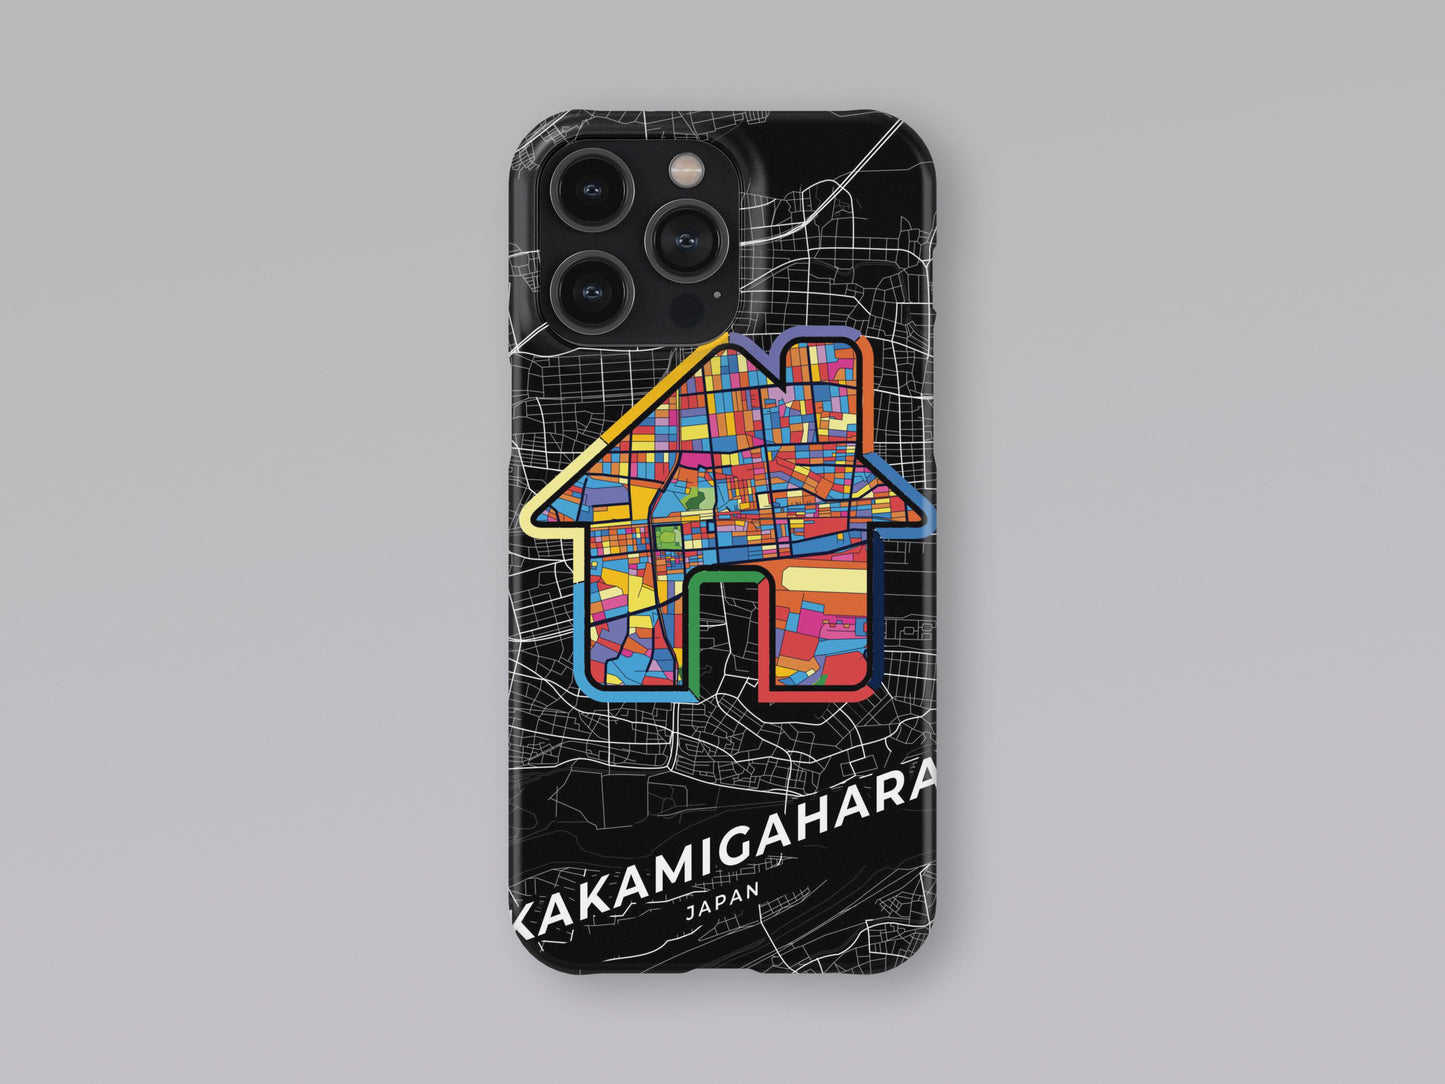 Kakamigahara Japan slim phone case with colorful icon. Birthday, wedding or housewarming gift. Couple match cases. 3